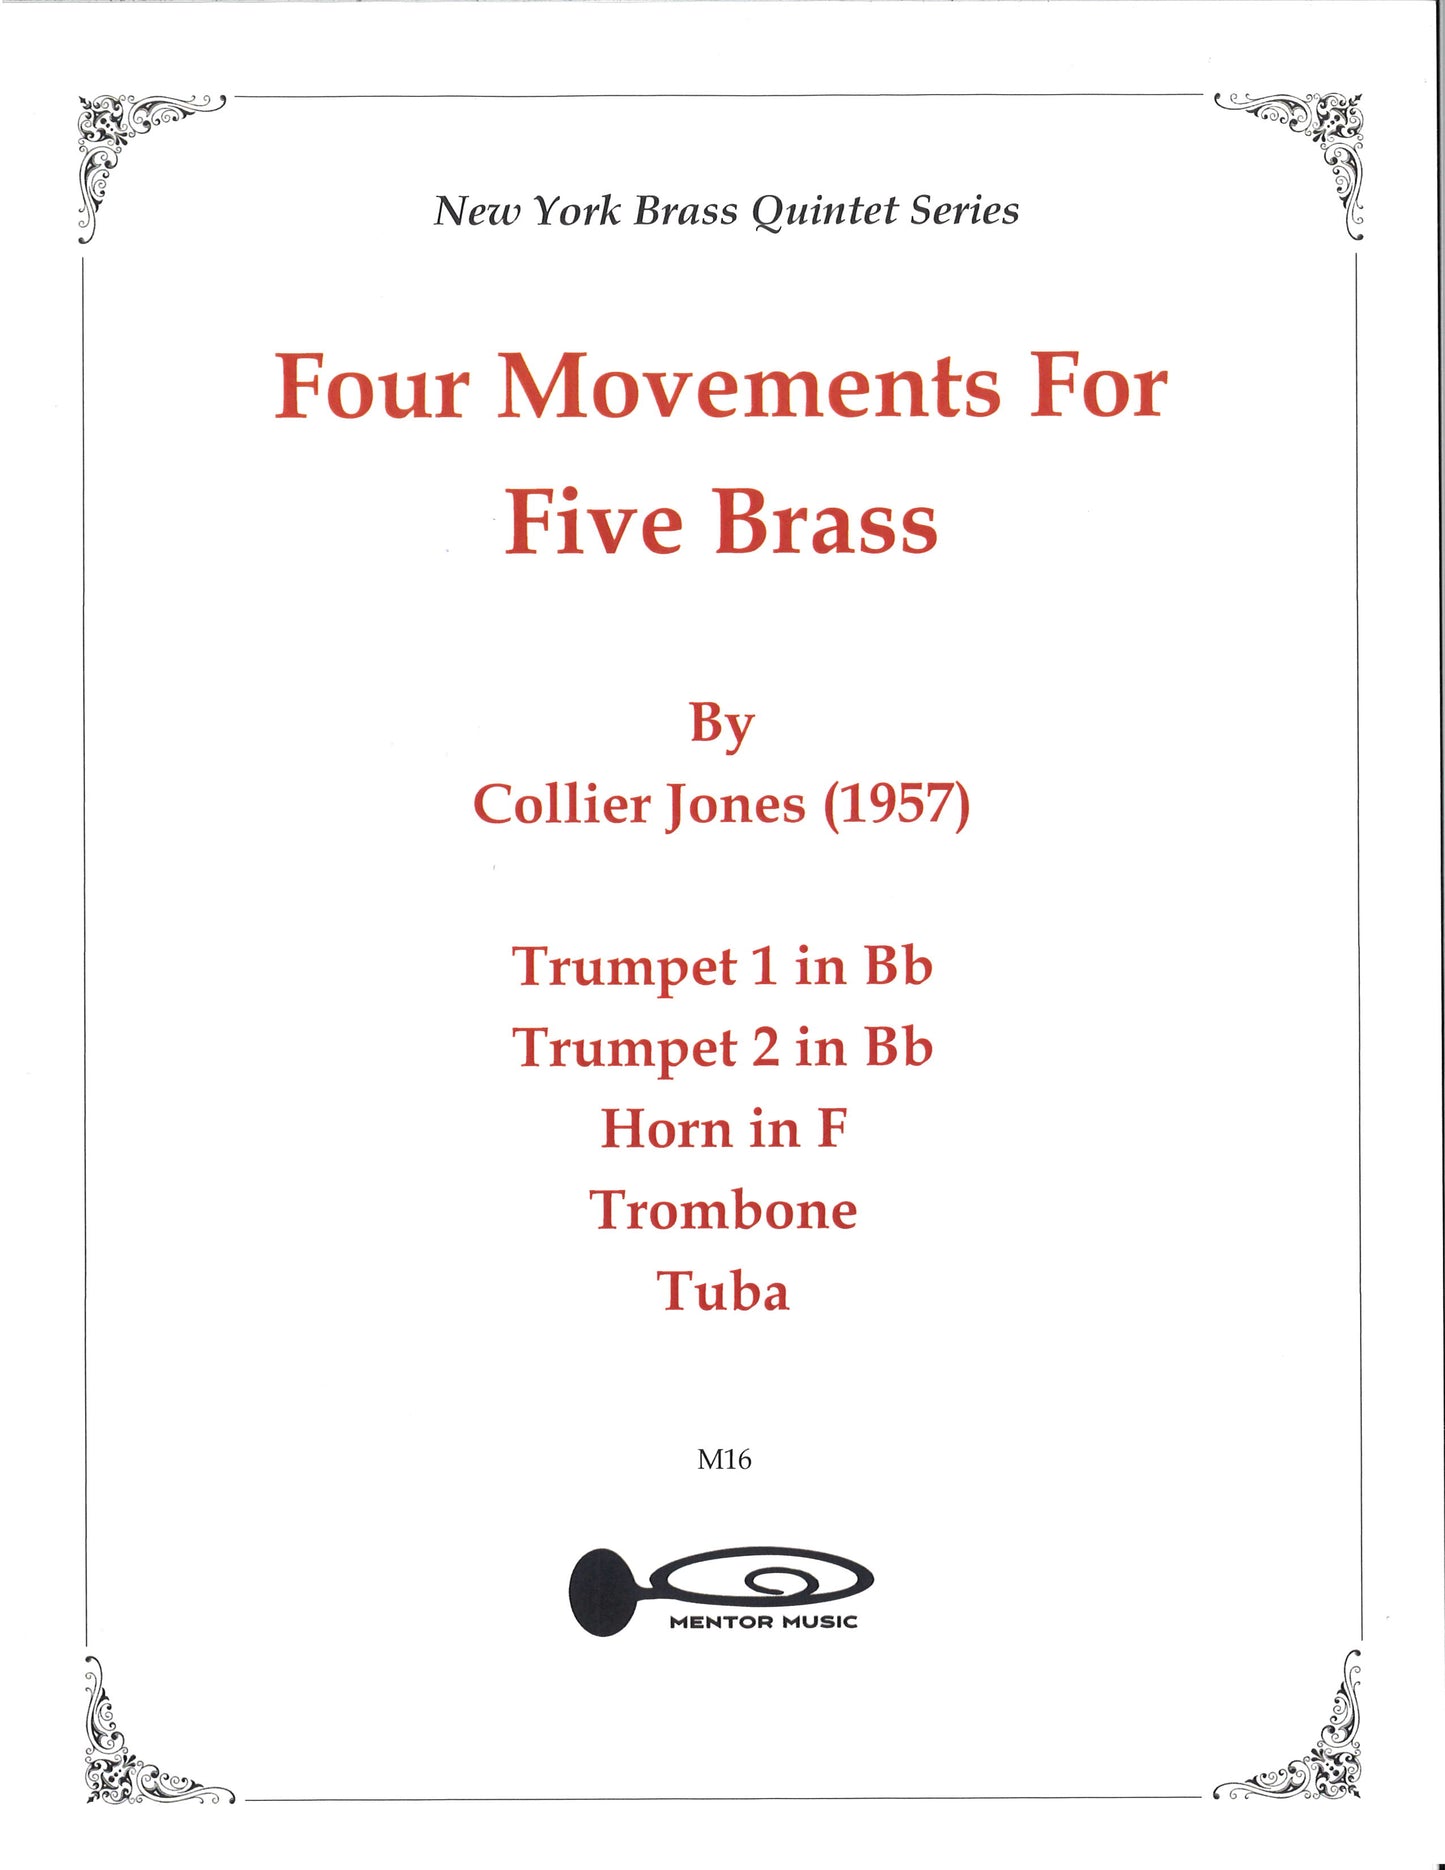 Four Movements for Five Brass (1957) Collier Jones